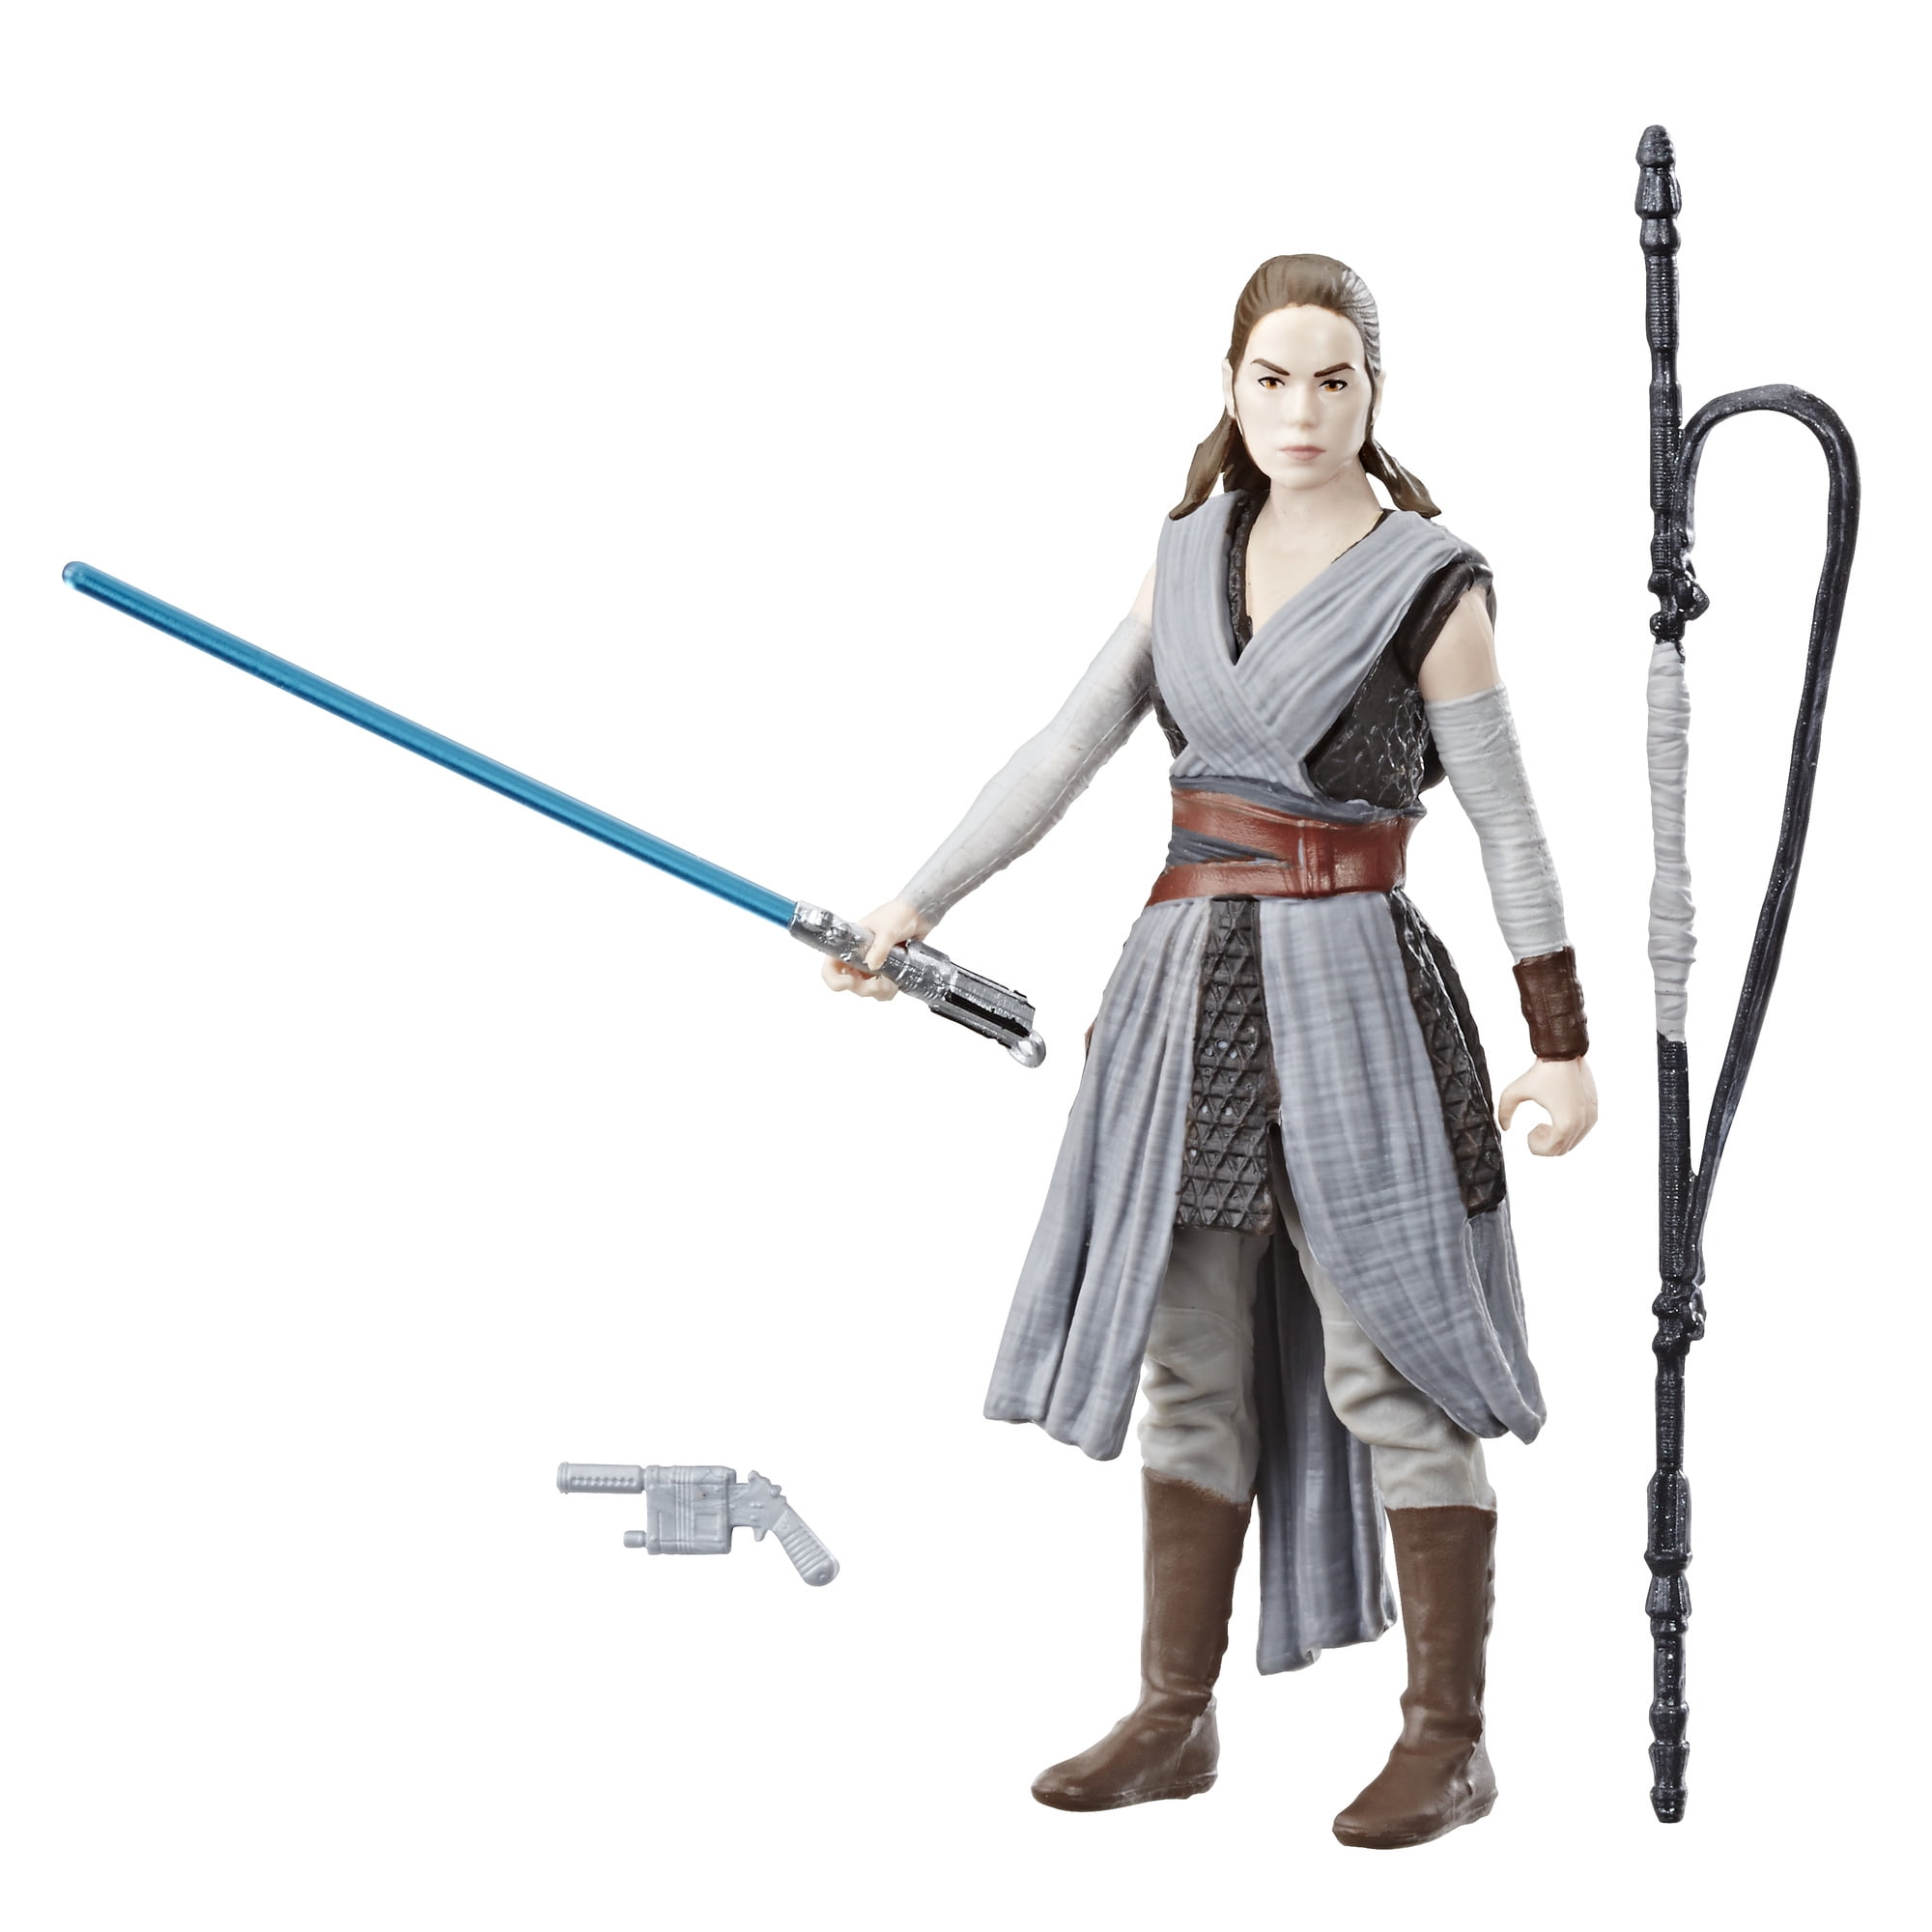 Hasbro Star Wars Galaxy of Adventures Rey Action Figure The Rise of Skywalker